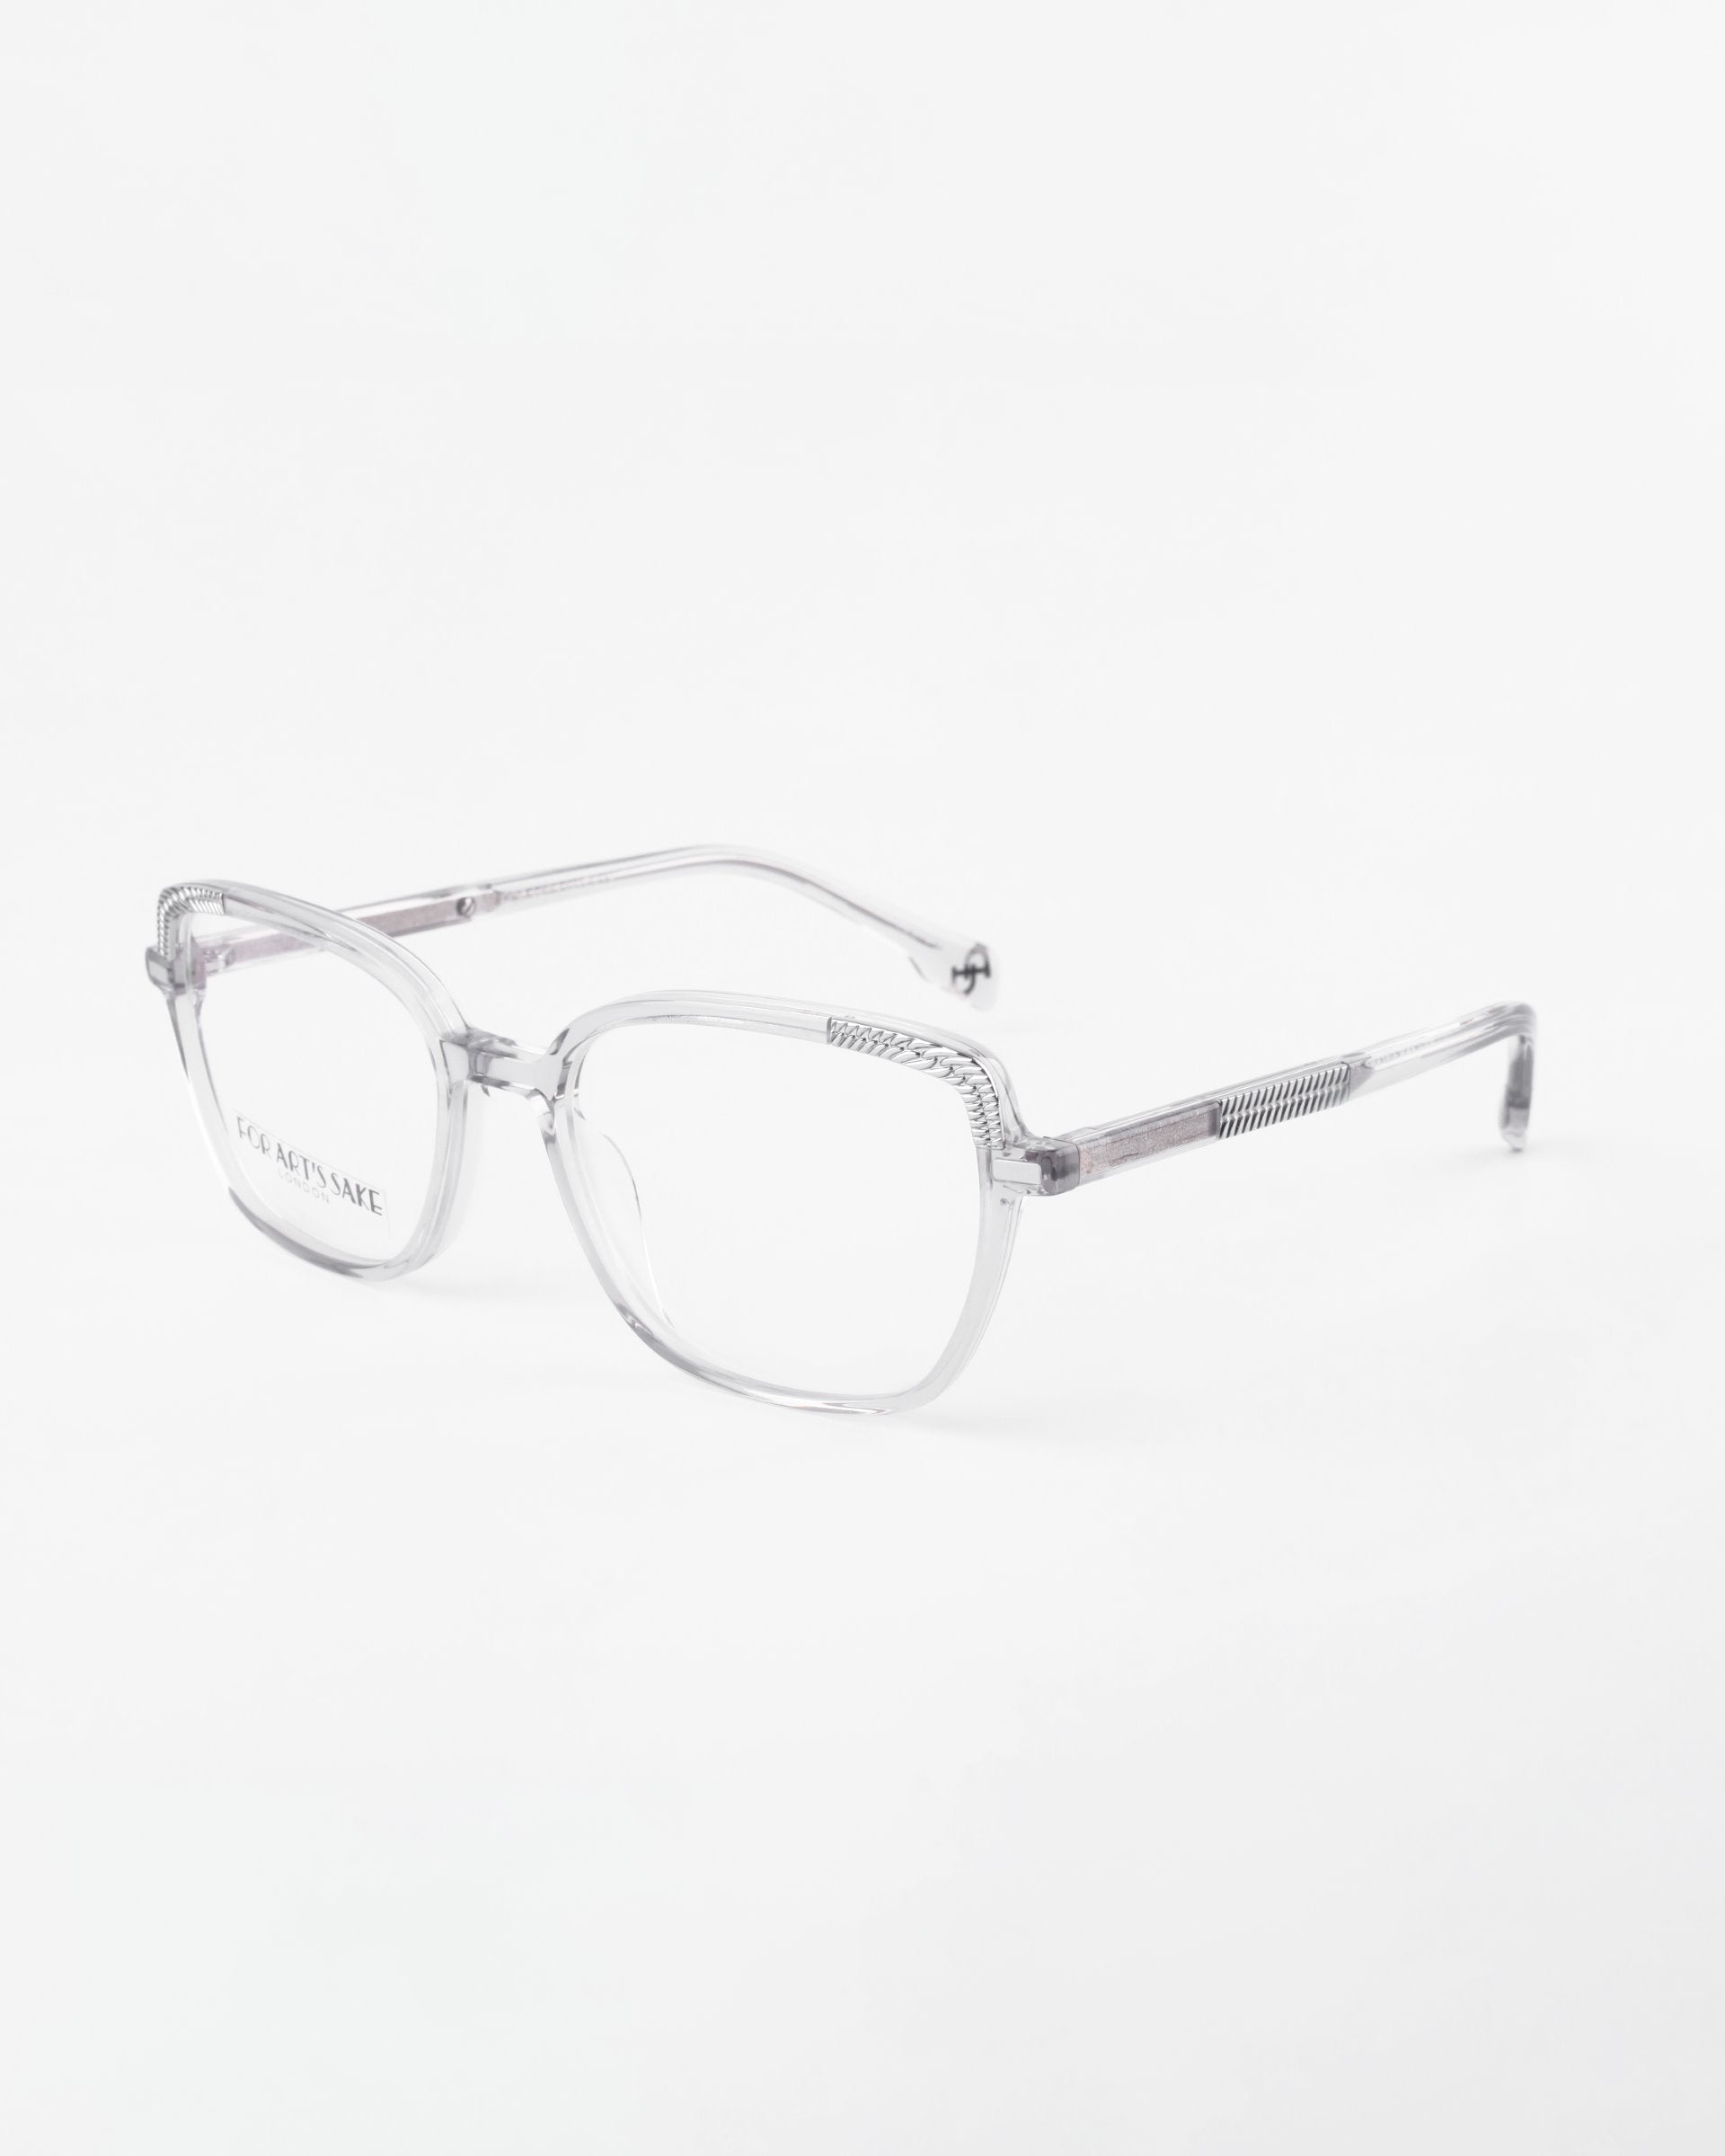 A pair of For Art&#39;s Sake® Mimosa clear, rectangular eyeglasses with thin, transparent frames. The prescription lenses are also clear, and the temples are adorned with striped detailing near the hinges. Accented by 18-karat gold-plated touches, the glasses are positioned against a white background.